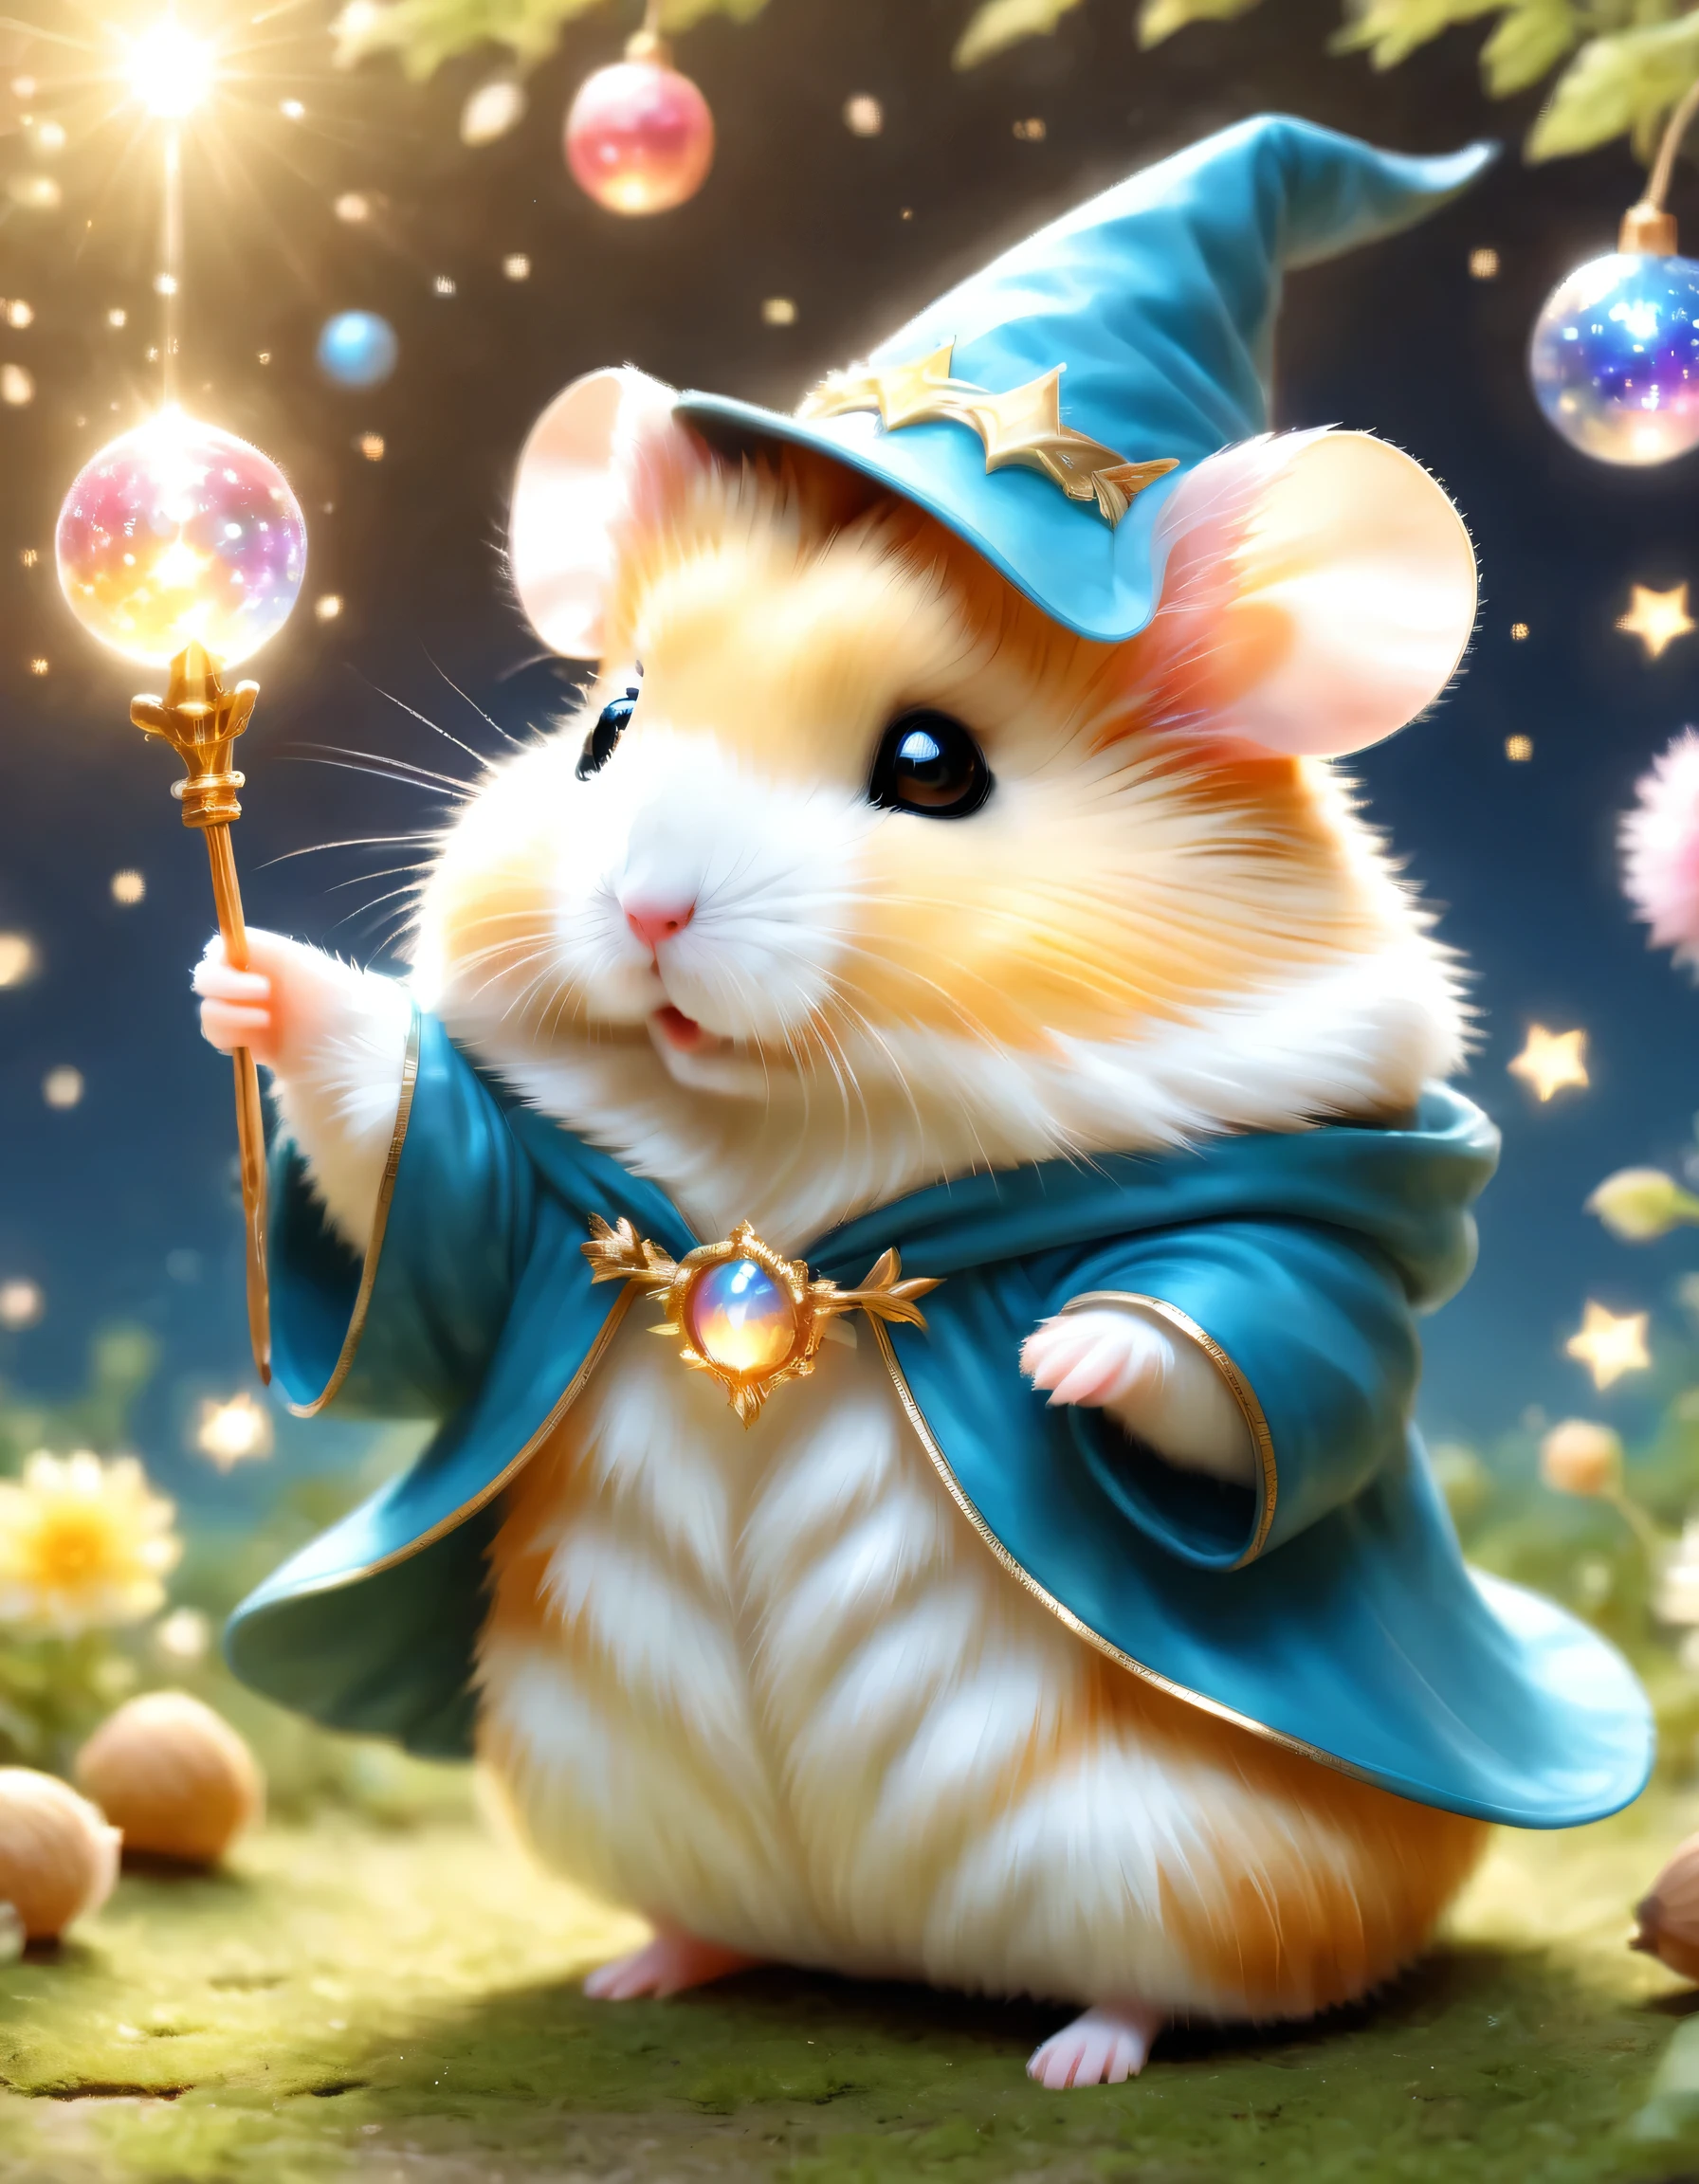 ((Dance Hamster)),((Confetti)),dance,Please raise your hand,Jump,Open your mouth,indoor,masterpiece,highest quality,Fluffy Hamster,a bit,cute,fun,happiness,,Stylish scenery,22.2 Shine,celebration,Anatomically correct,all the best,最高にCute hamster,Cute hamster，,Fantasy,Randolph Caldecott Style,Consciousness upward,watercolor,Gentle colors,((Confetti)),Shine,star,Light,Sequins,Crown,The king's cloak,Holding up the trophy,Fluffy Hamster,lame